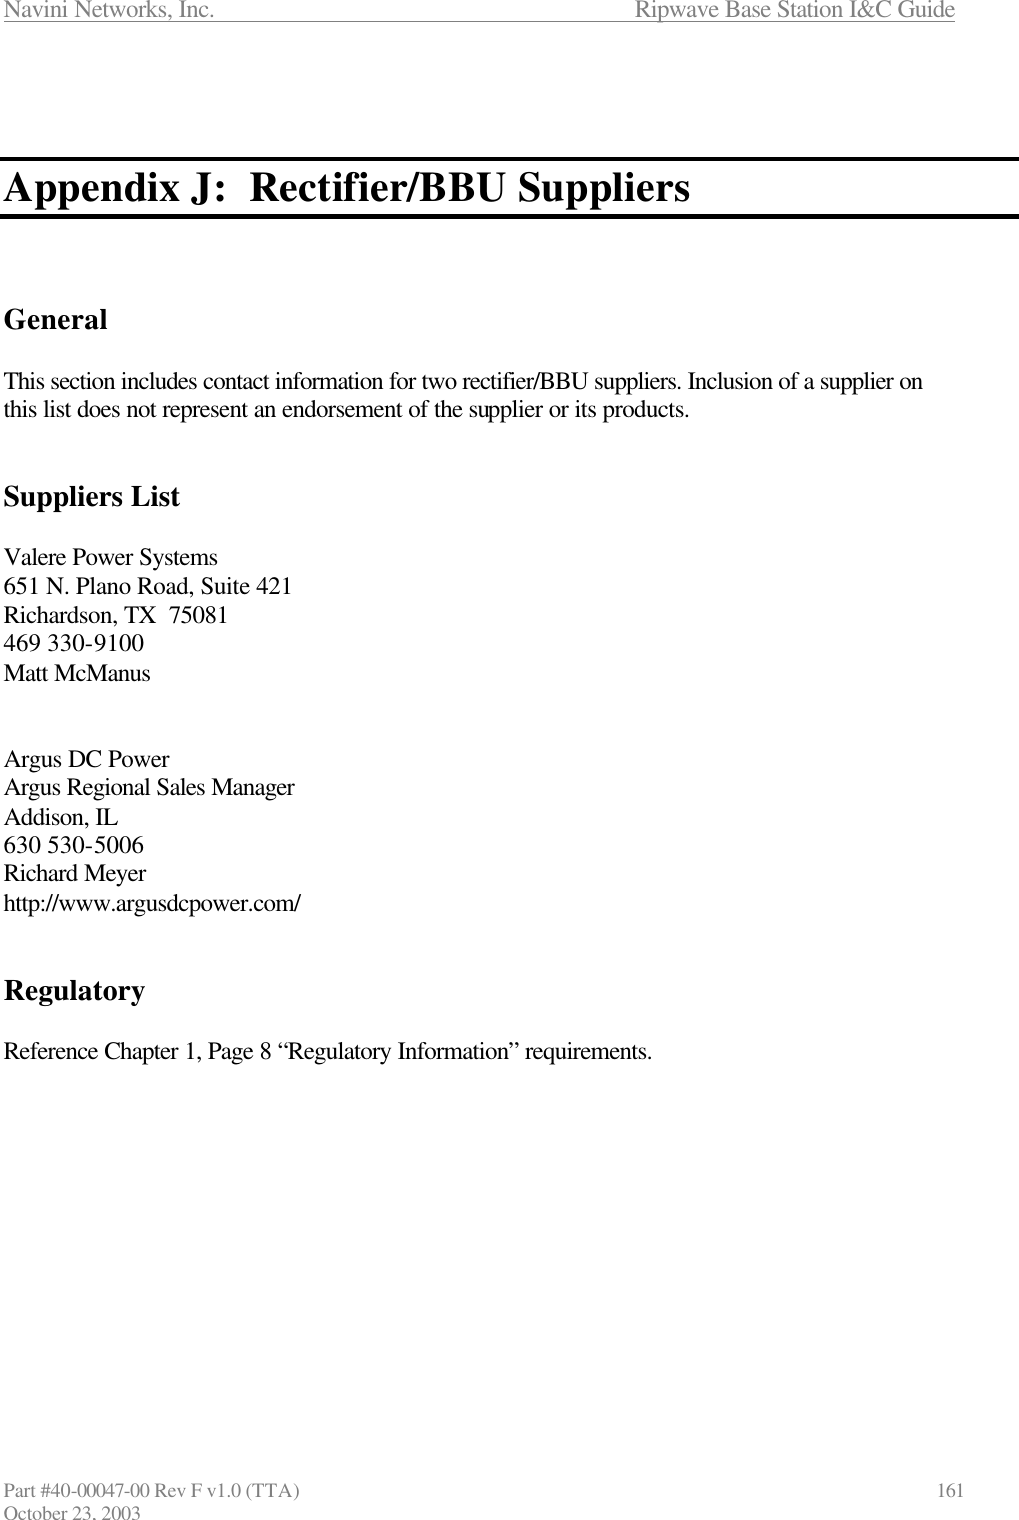 Navini Networks, Inc.                      Ripwave Base Station I&amp;C Guide Part #40-00047-00 Rev F v1.0 (TTA)                            161 October 23, 2003    Appendix J:  Rectifier/BBU Suppliers    General  This section includes contact information for two rectifier/BBU suppliers. Inclusion of a supplier on this list does not represent an endorsement of the supplier or its products.   Suppliers List  Valere Power Systems 651 N. Plano Road, Suite 421 Richardson, TX  75081 469 330-9100 Matt McManus   Argus DC Power Argus Regional Sales Manager Addison, IL 630 530-5006 Richard Meyer http://www.argusdcpower.com/   Regulatory  Reference Chapter 1, Page 8 “Regulatory Information” requirements.